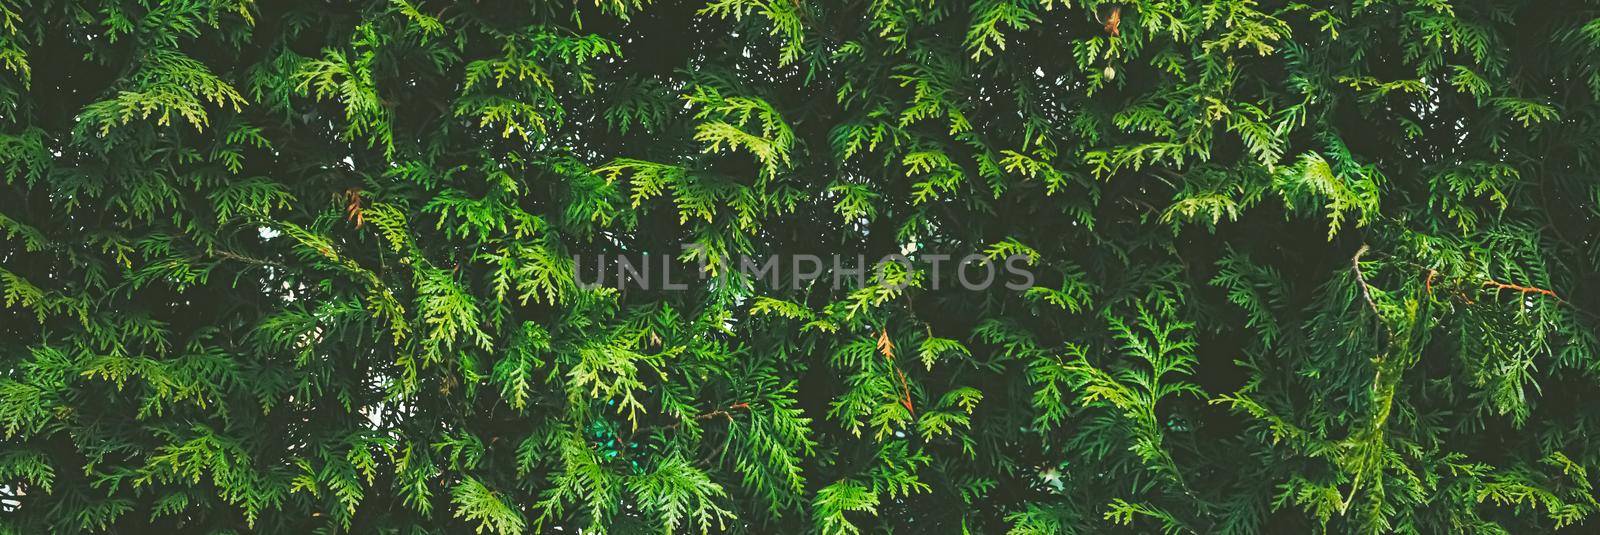 Thuja shrub wall as plant texture and nature background by Anneleven